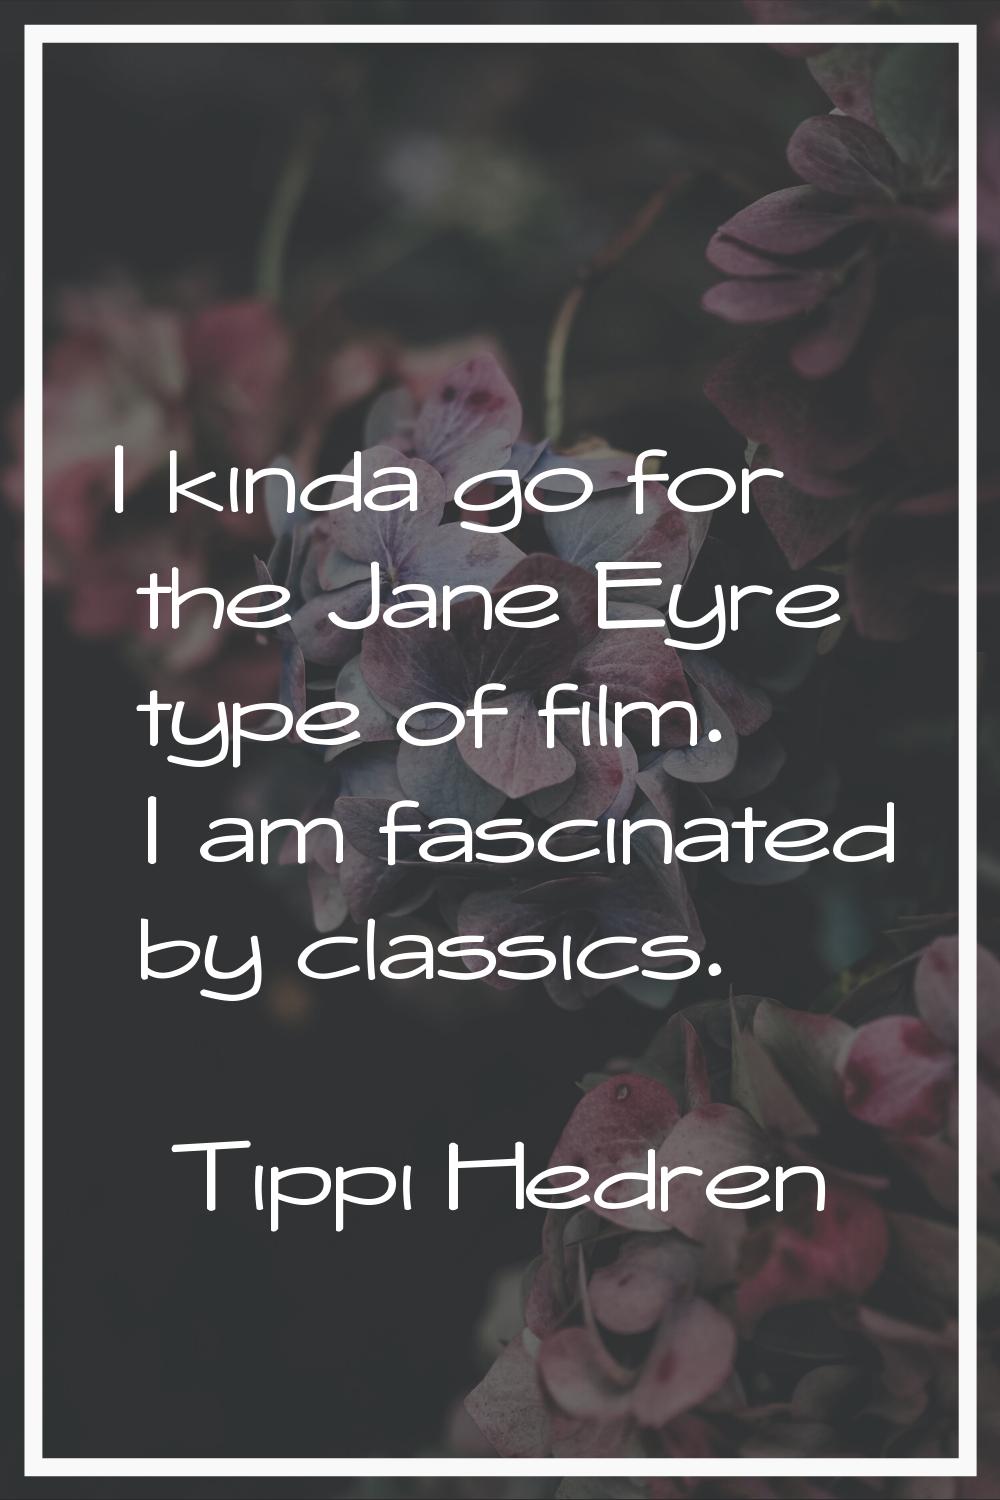 I kinda go for the Jane Eyre type of film. I am fascinated by classics.